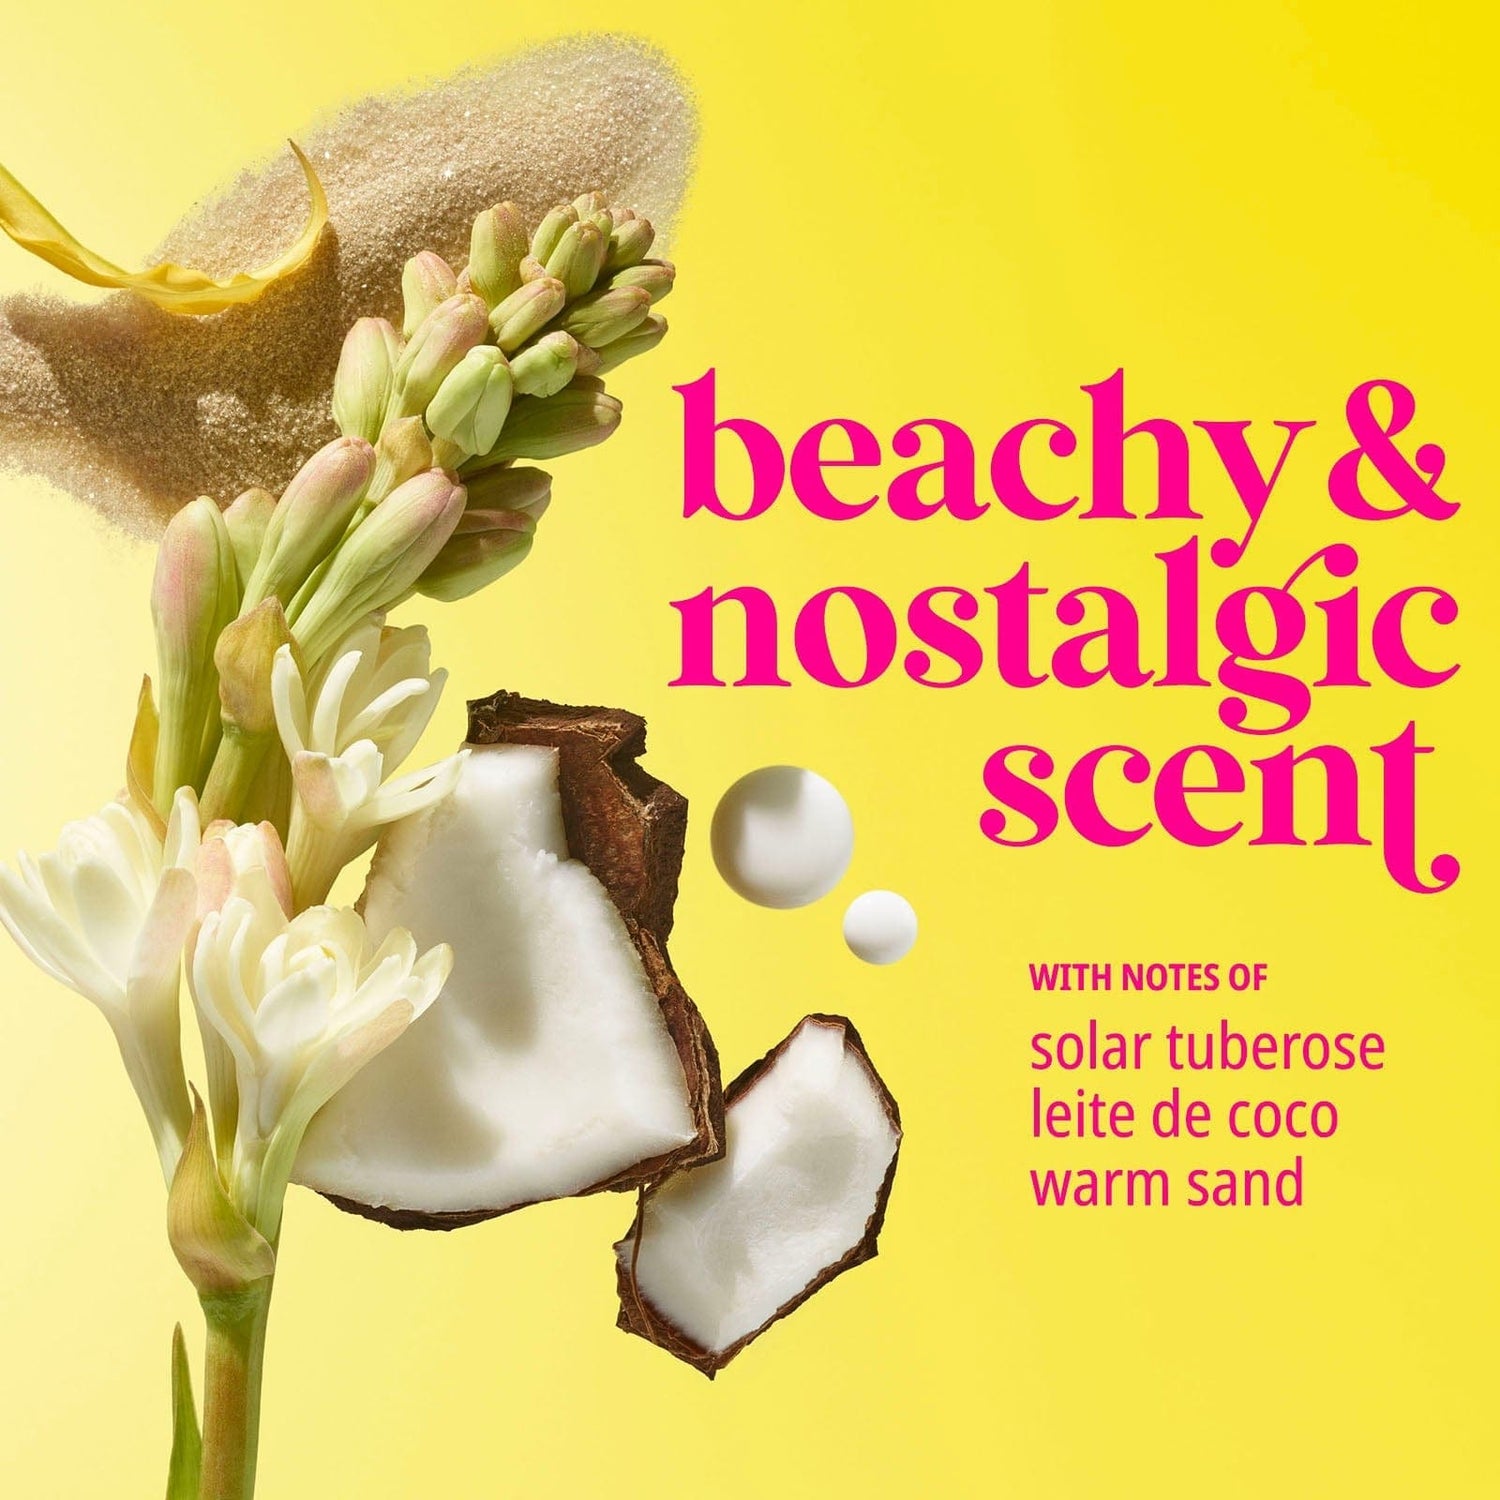 Beachy &amp; nostalgic scent with notes of tuberose, leite de coco, and warm sand.